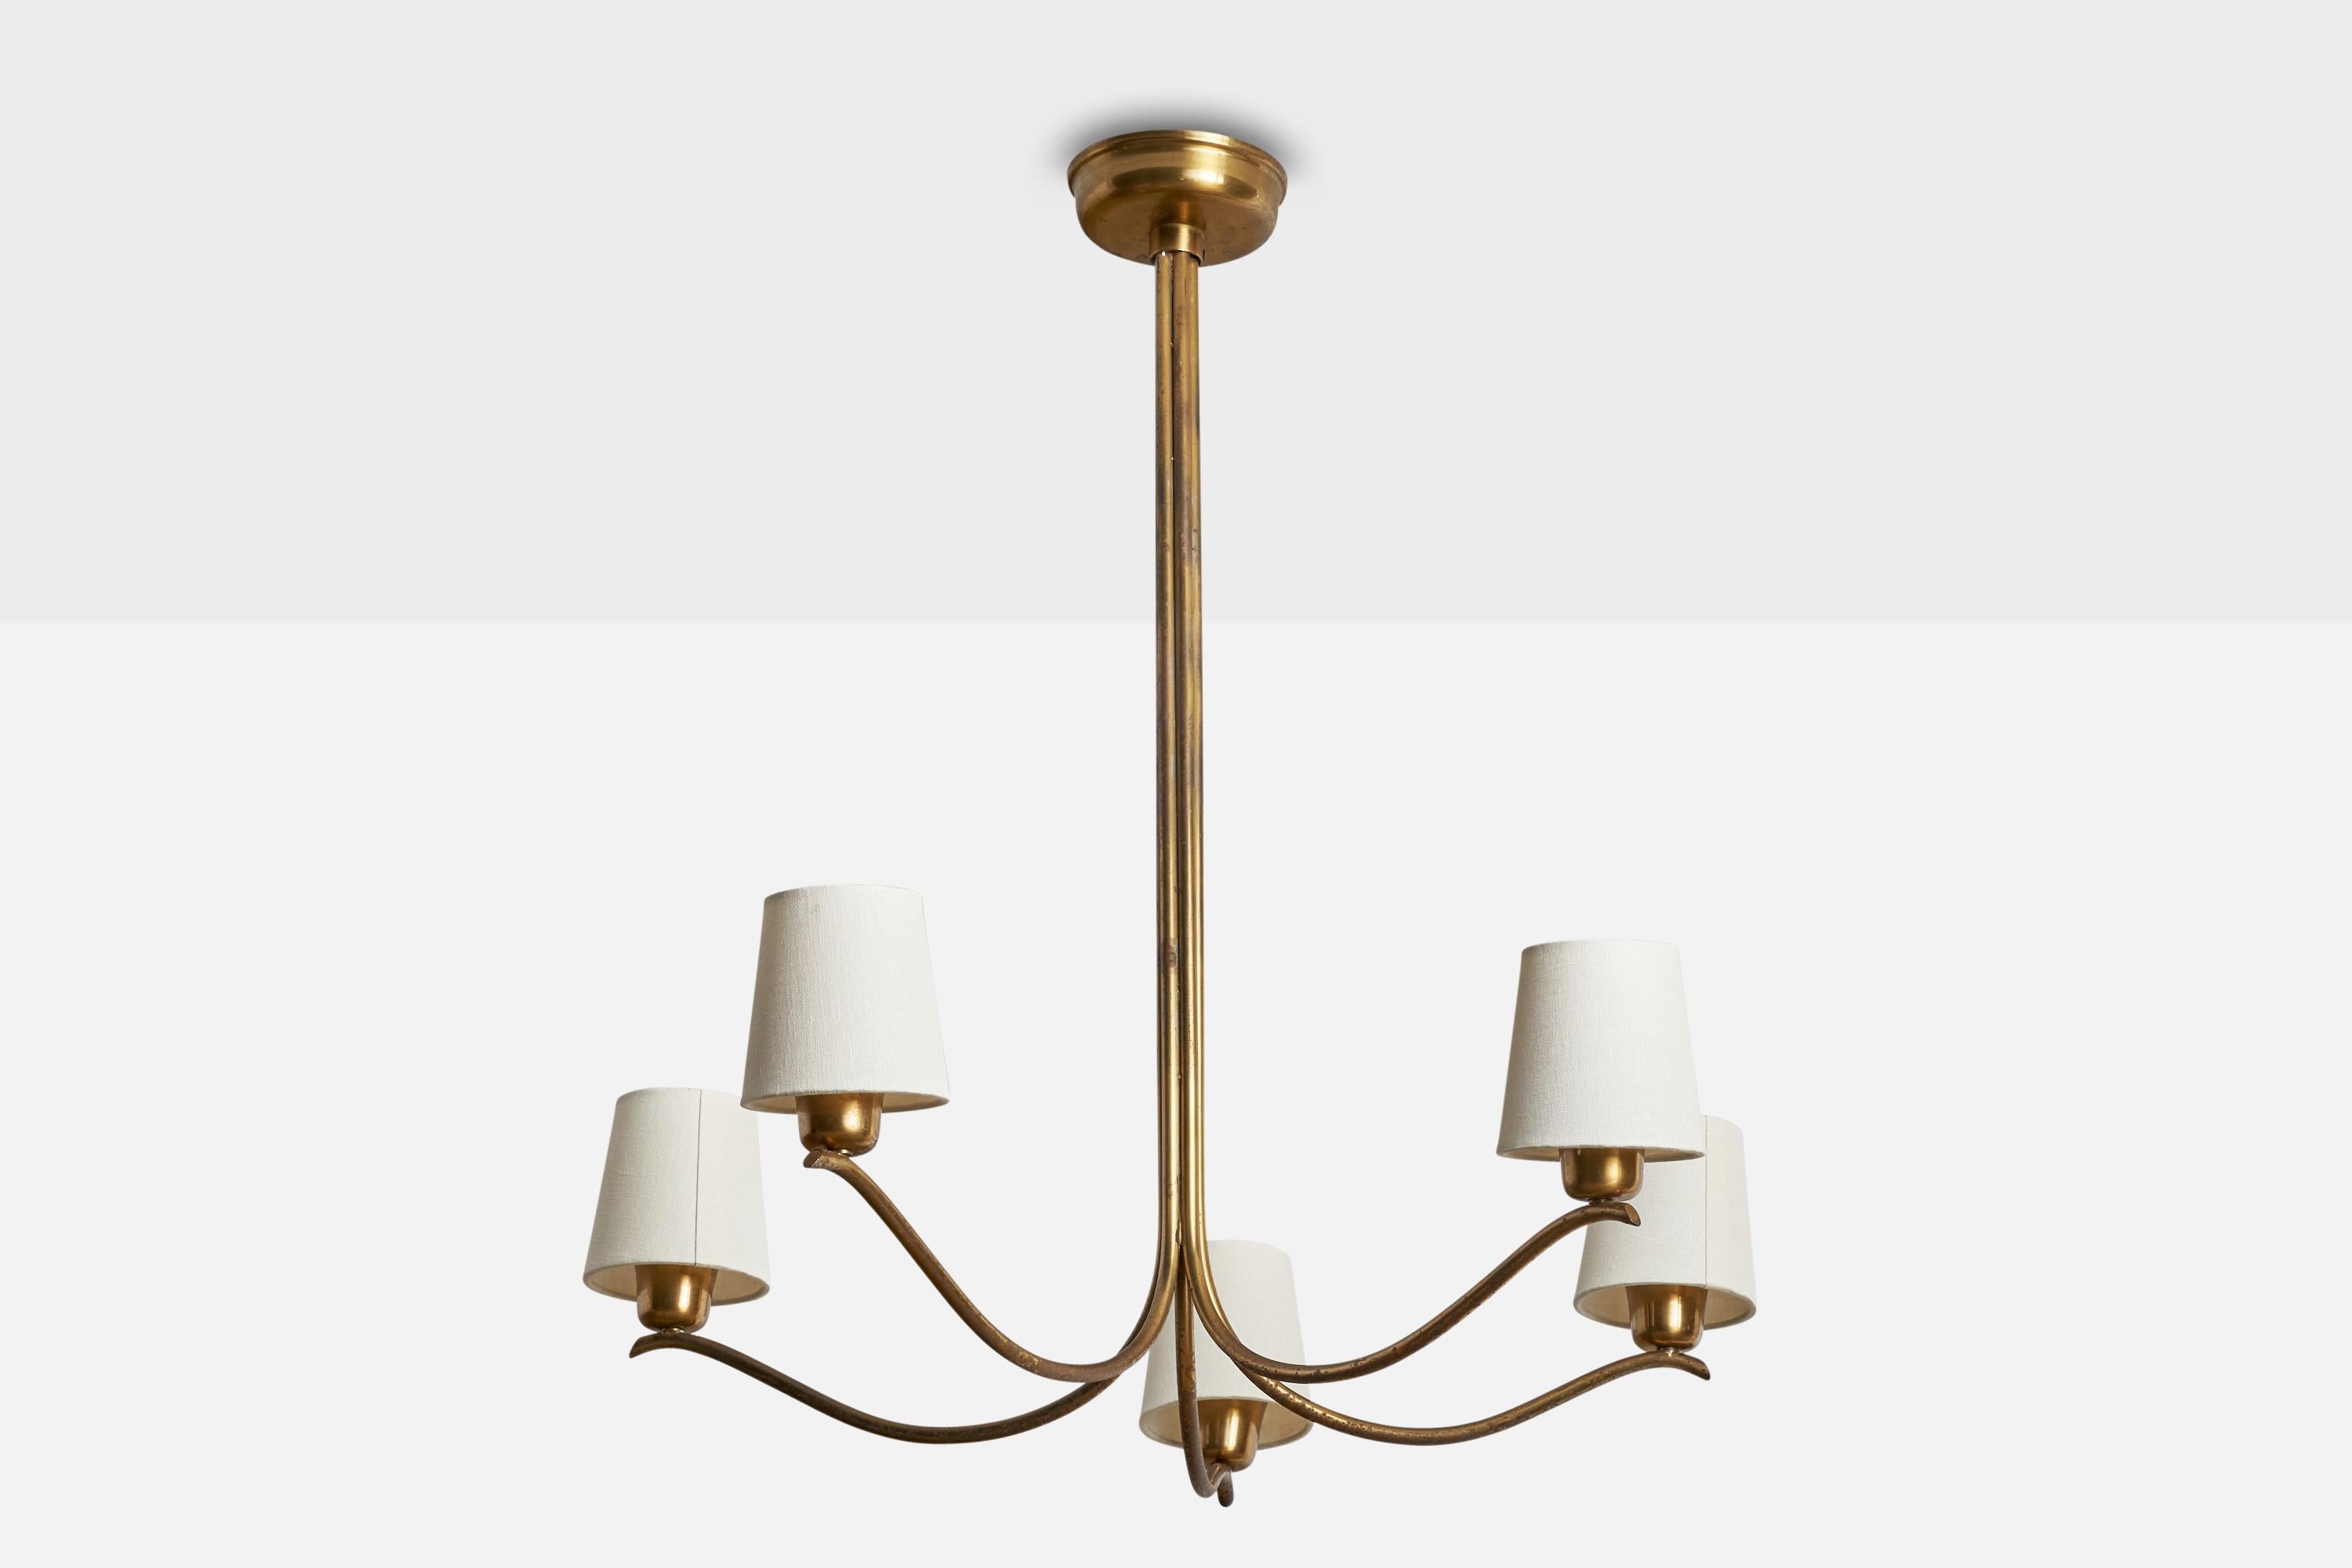 A brass and fabric chandelier designed and produced in Sweden, 1940s.

Dimensions of canopy (inches): 1.25” H x 5” Diameter
Socket takes standard E-26 bulbs. 5 sockets.There is no maximum wattage stated on the fixture. All lighting will be converted